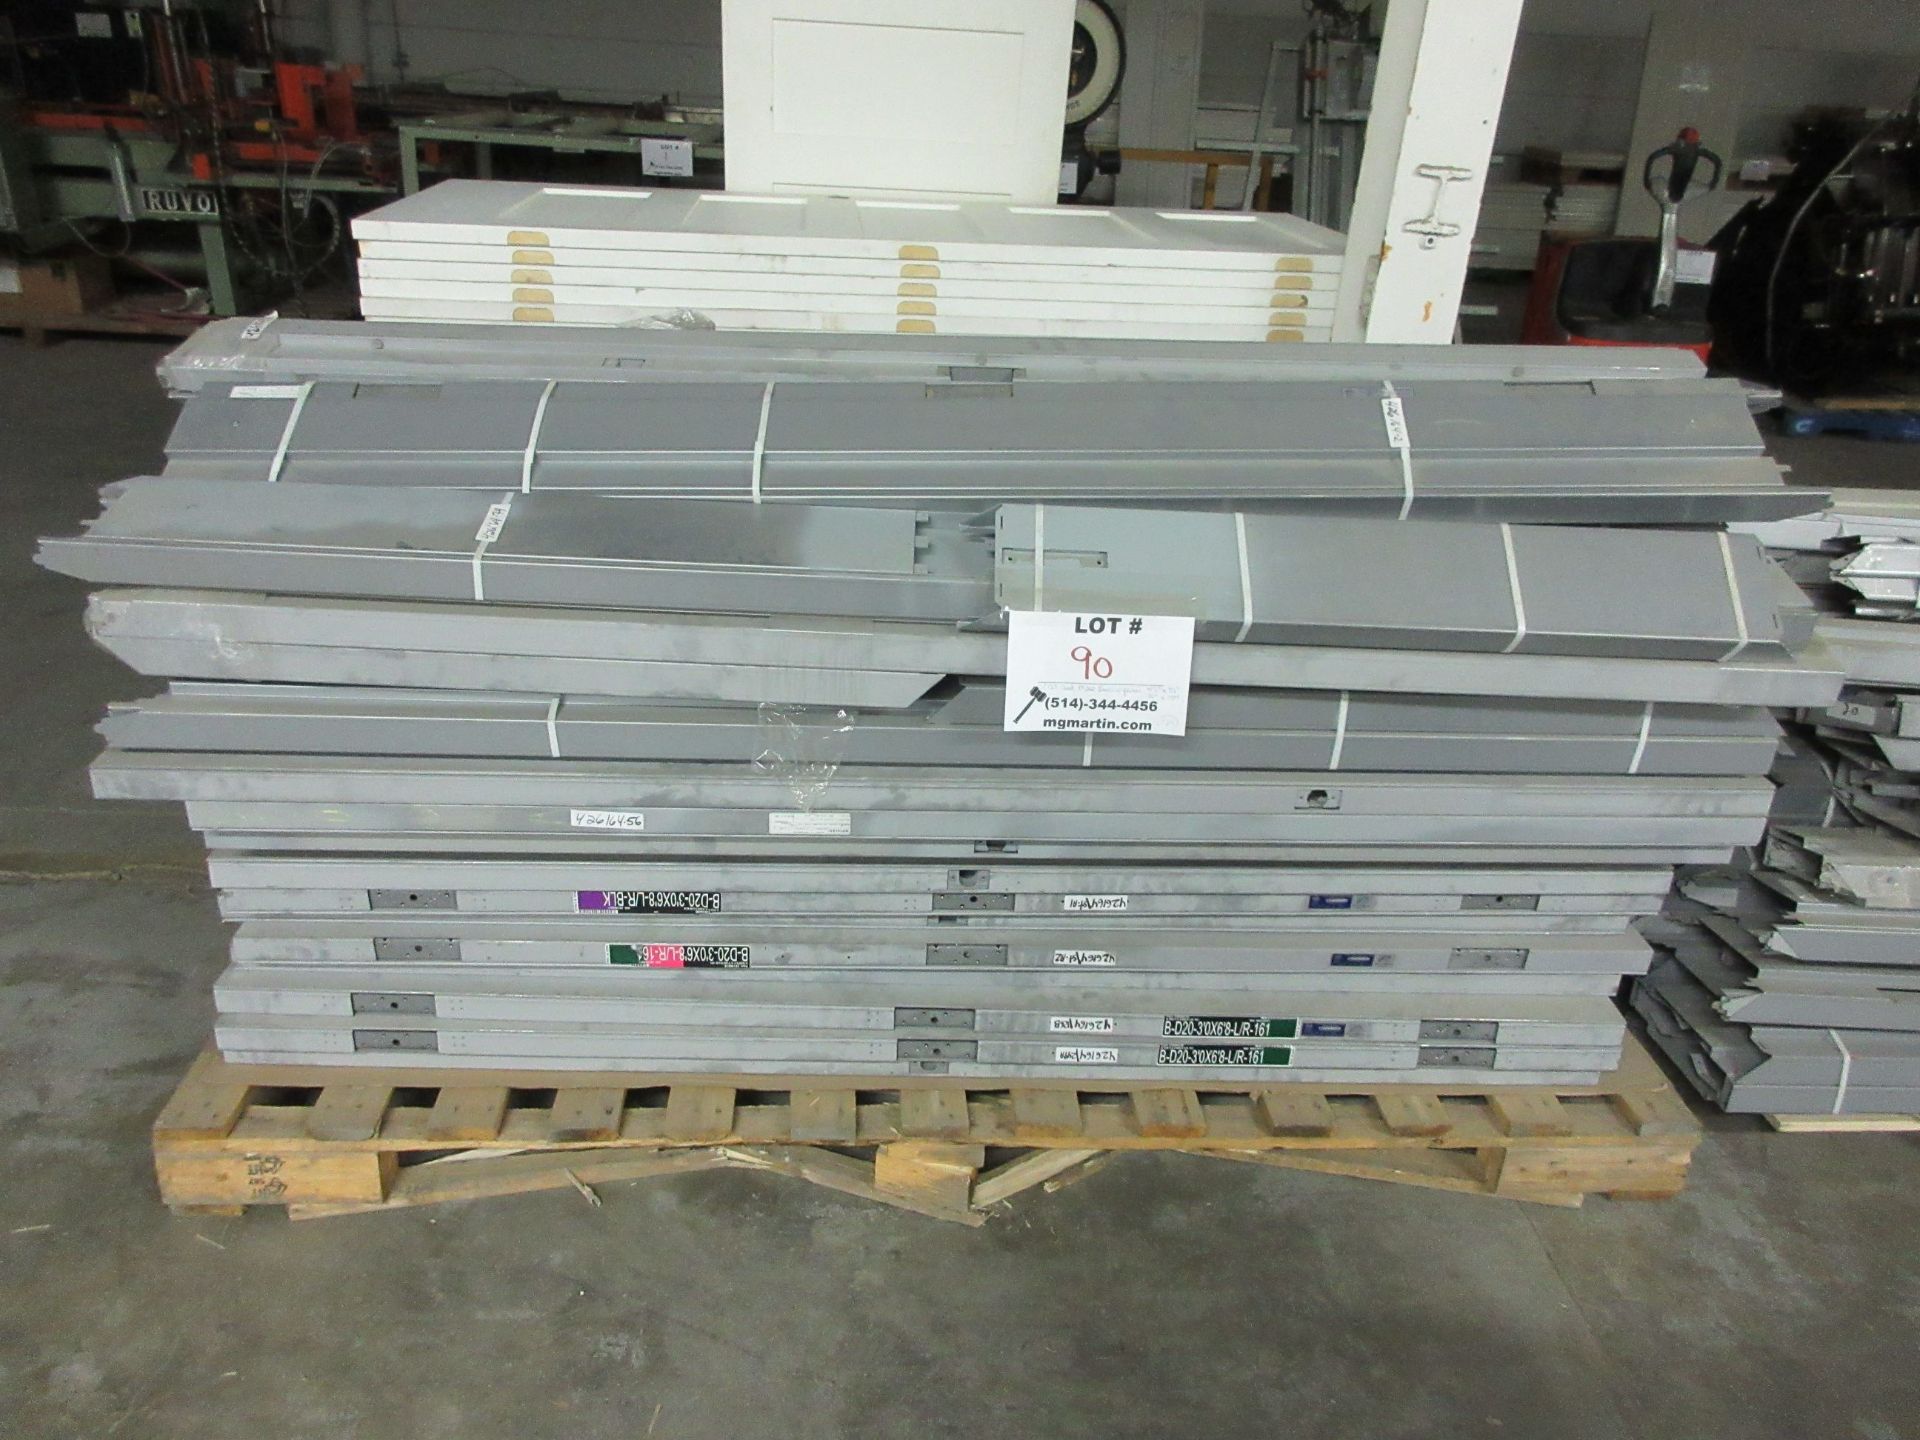 Assorted steel doors w/t frames, some fire rated 36",41 1/2" x 78",83" x 1 3/4" (qty 12)